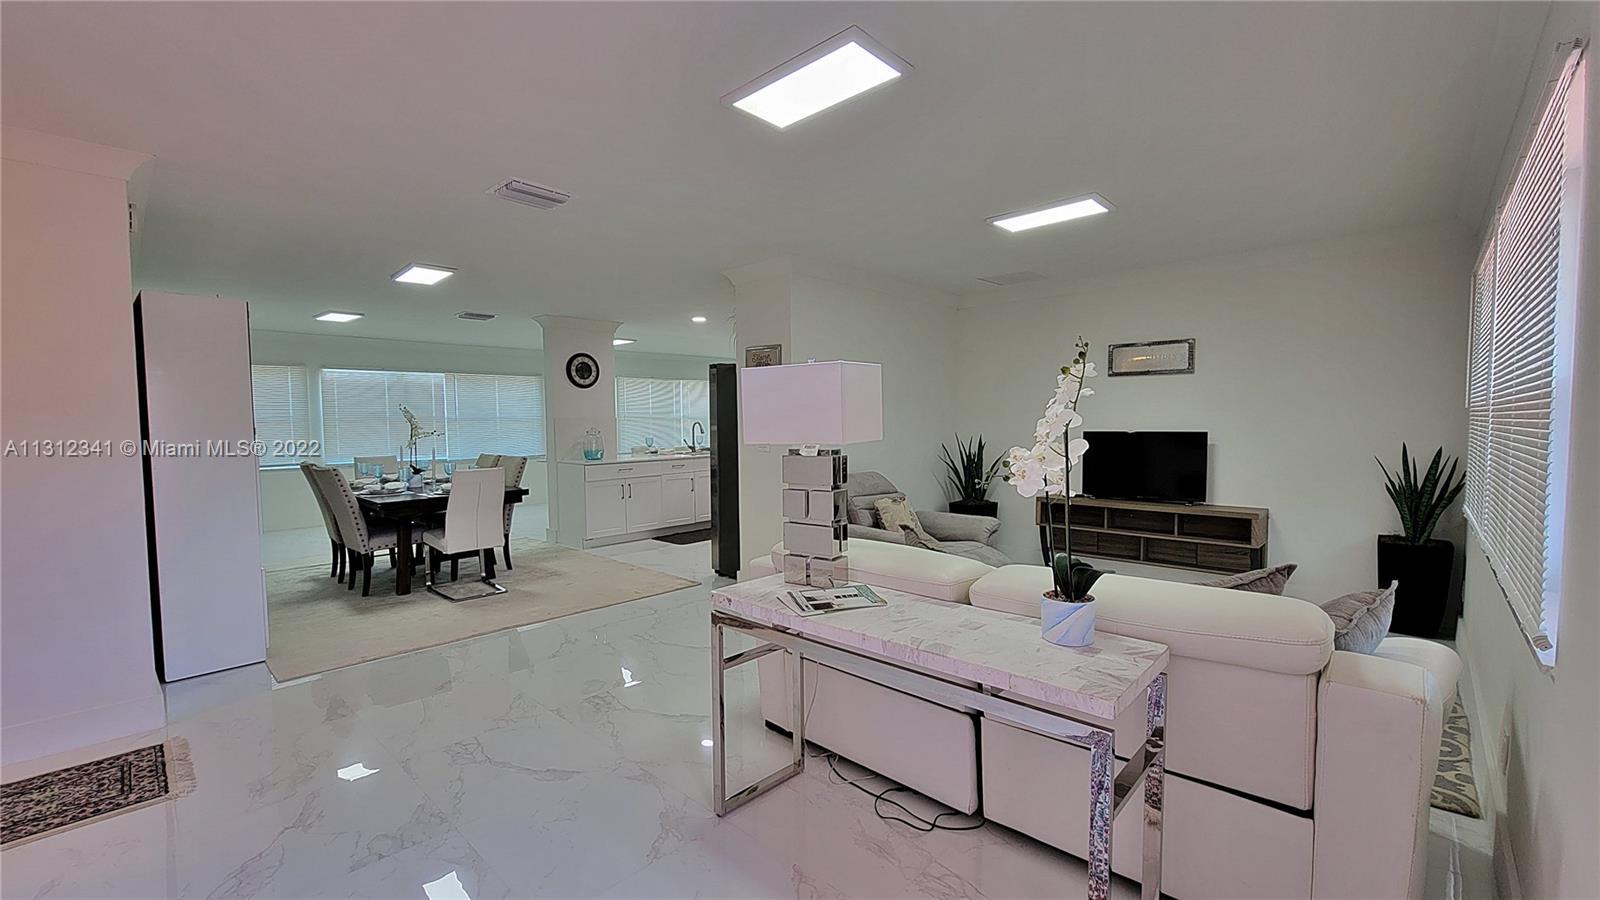 299k !!!!Penthouse 1.700 sqft, with Private Terrace, 5 to 9 minutes from Beach, walking distance Gul